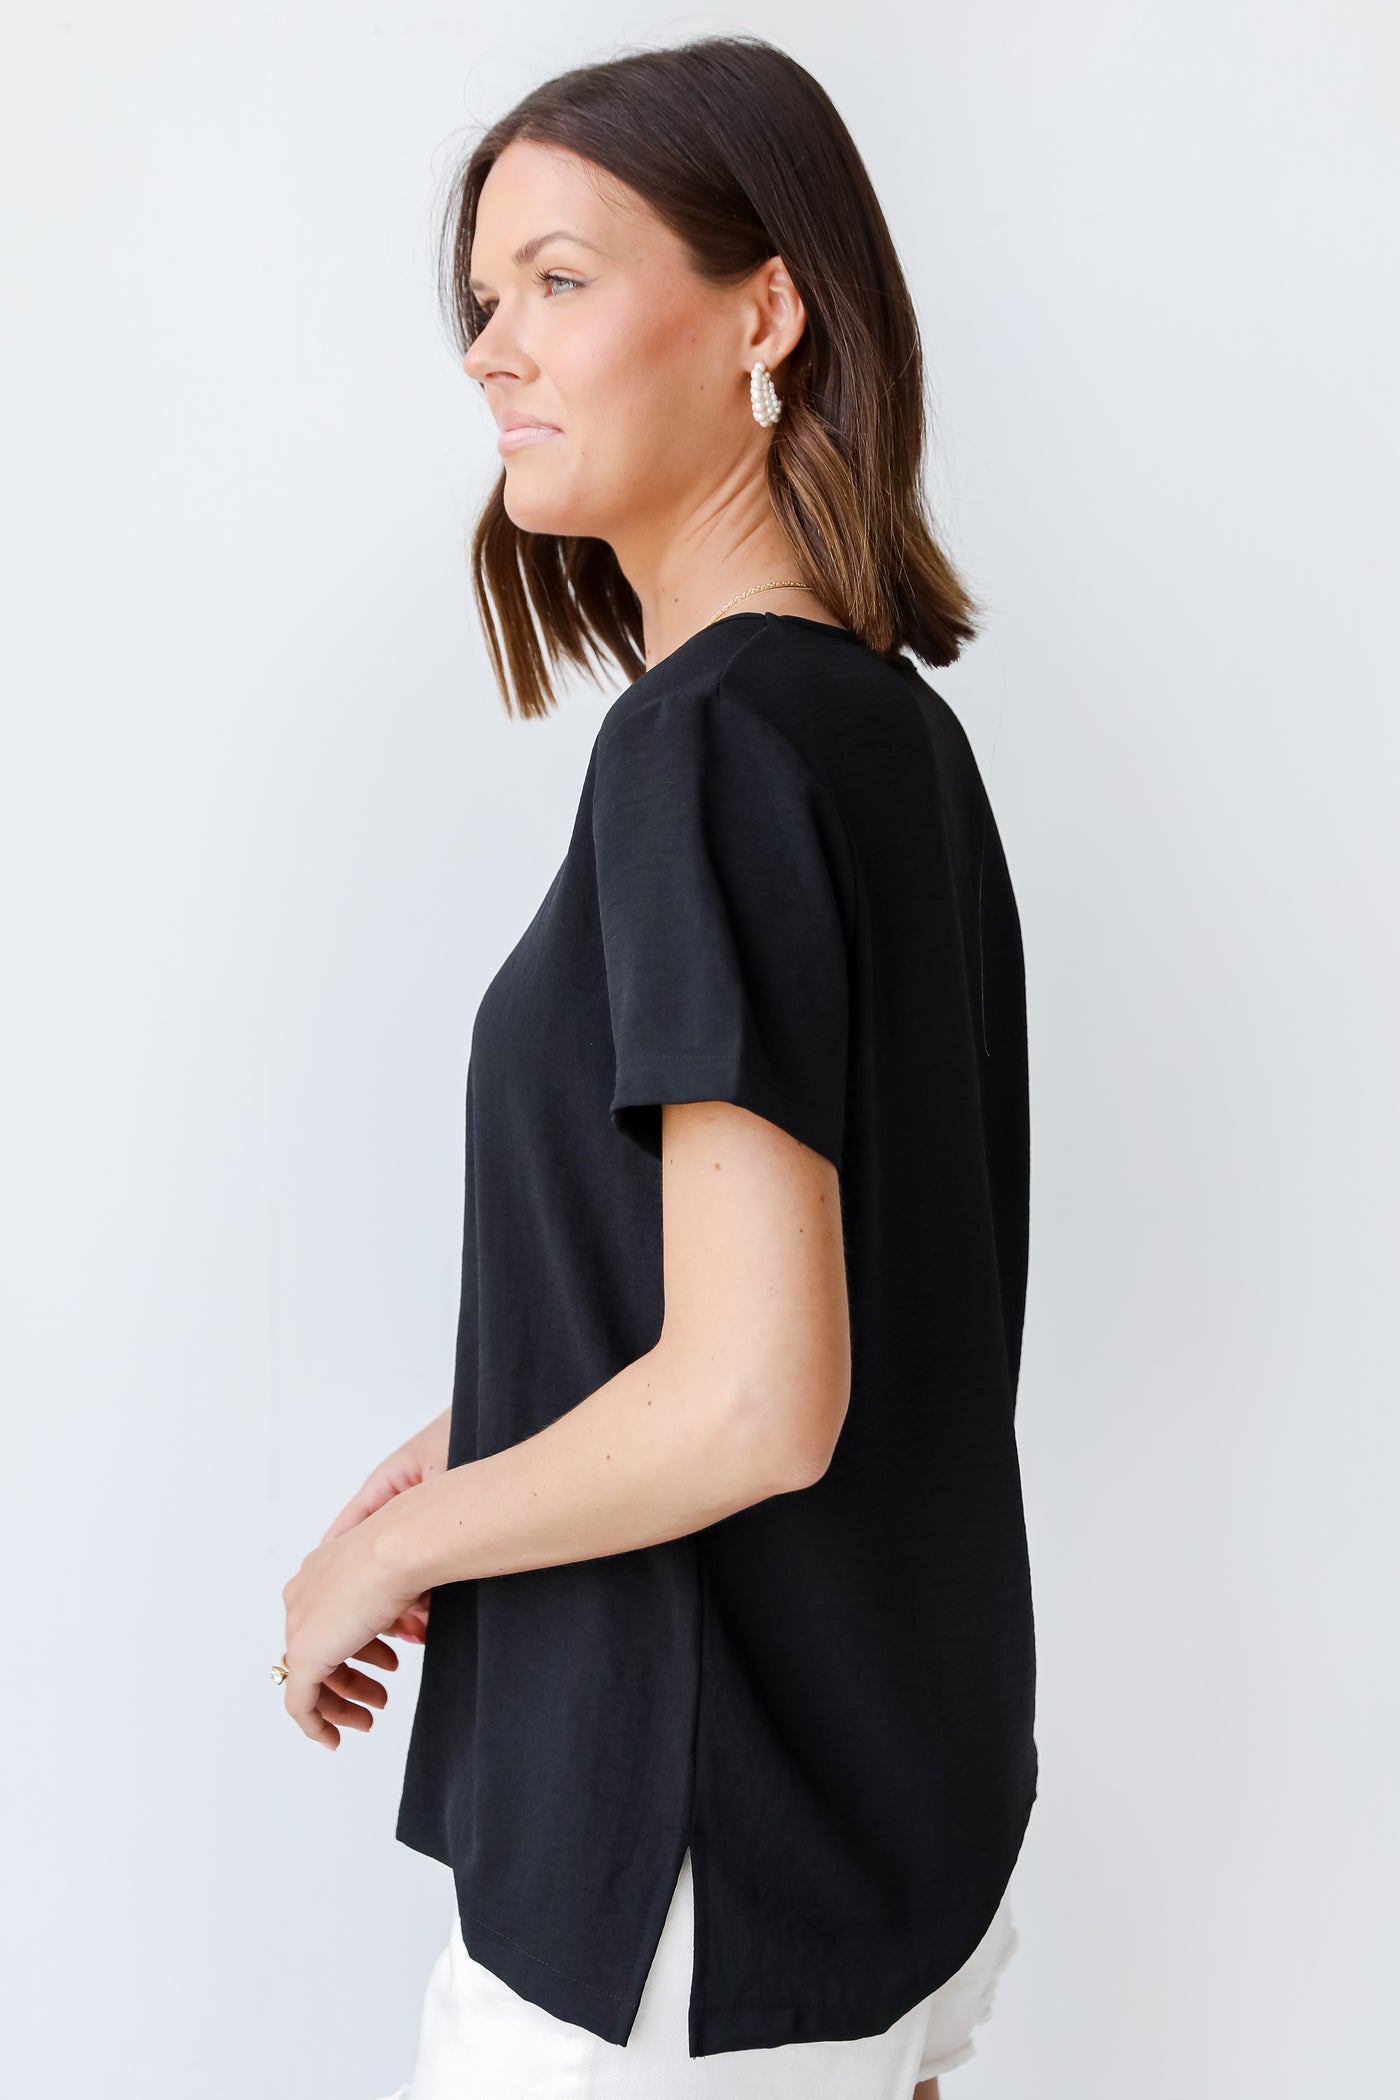 Blouse in black side view